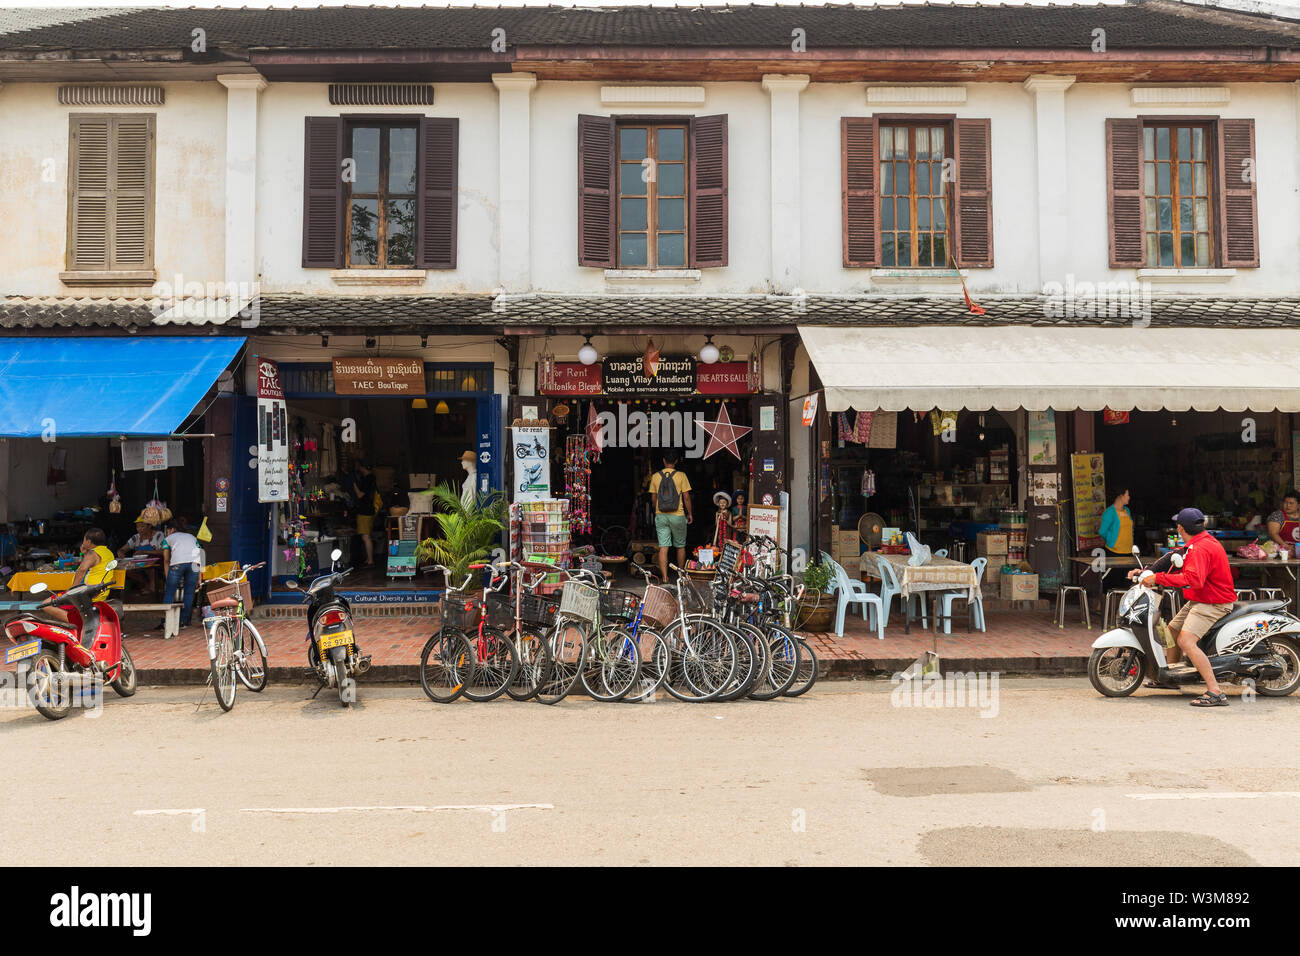 Bicycles and scooters parked in front of an old French colonial era building on the Sisavangvong Road in Luang Prabang, Laos. Stock Photo